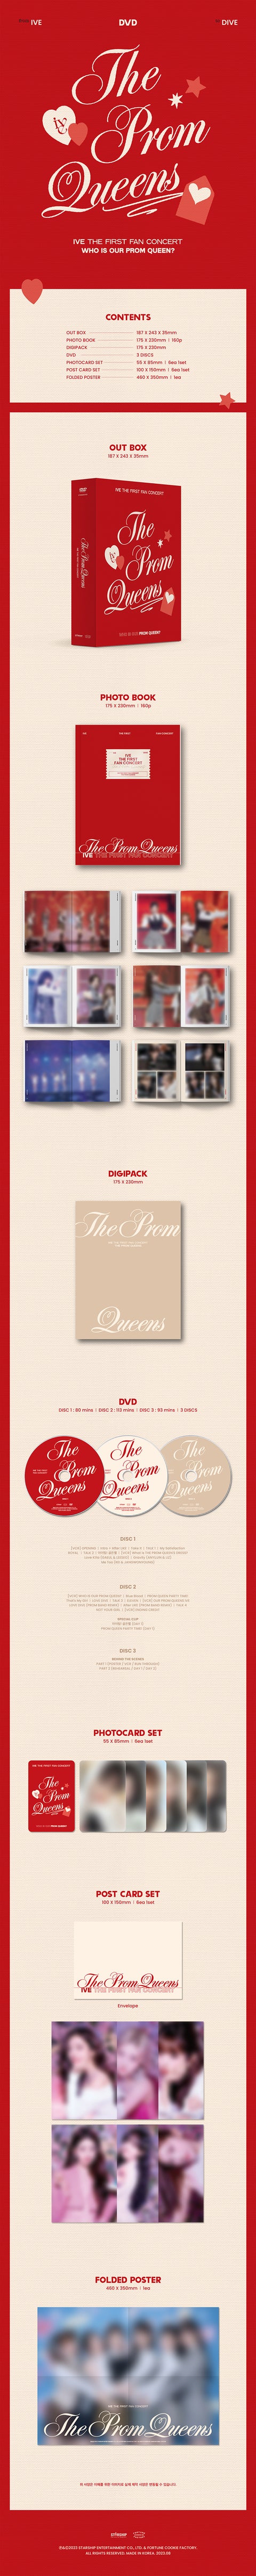 IVE - THE FIRST FAN CONCERT [The Prom Queens] (DVD VER.)